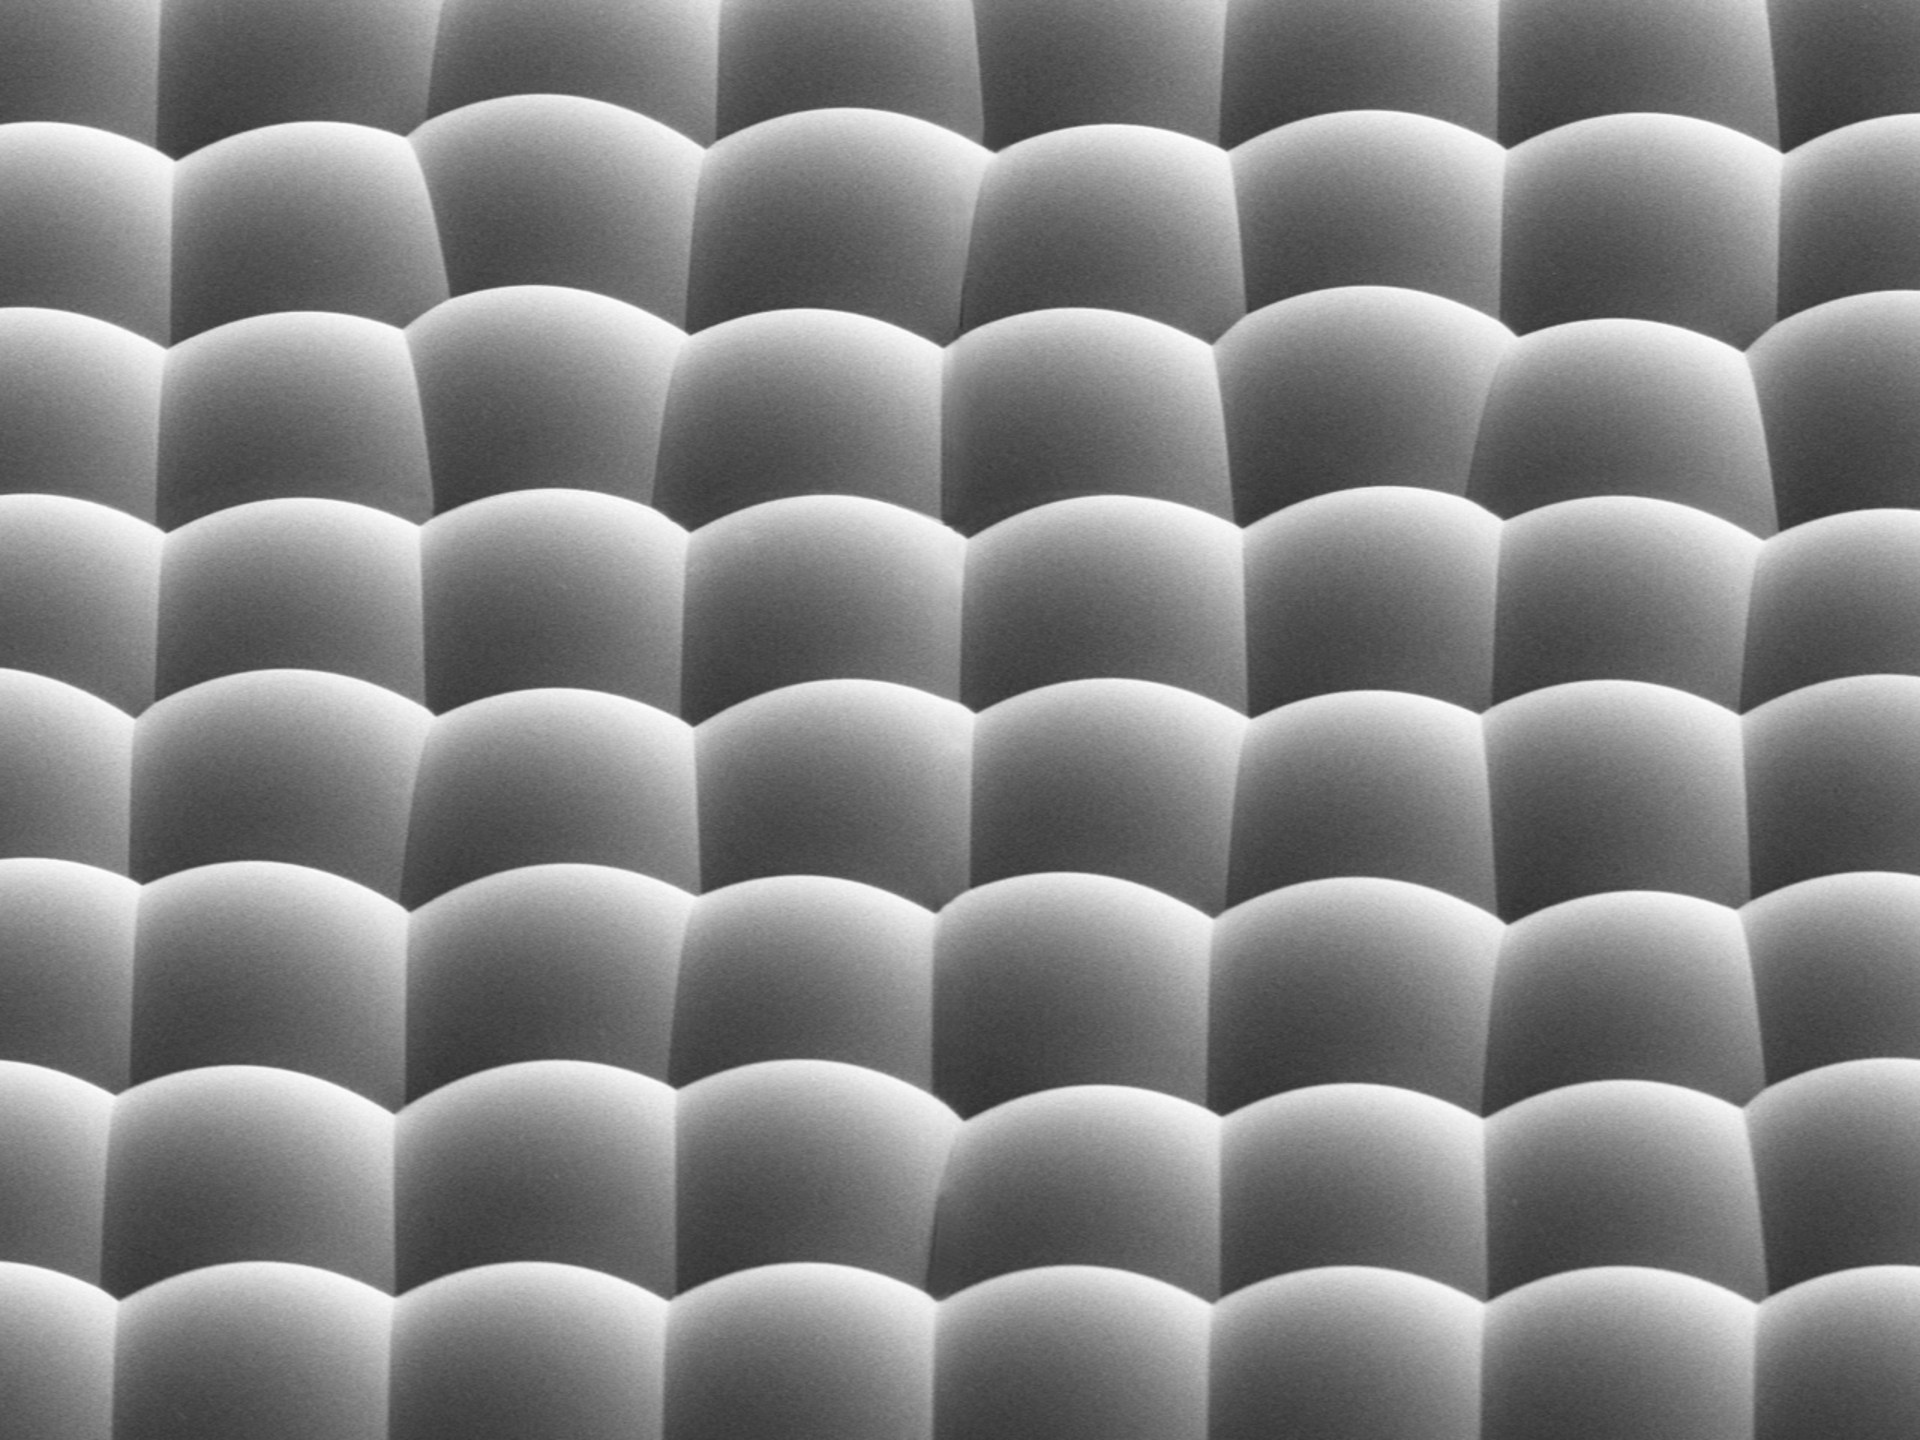 Densely packed microlens array 